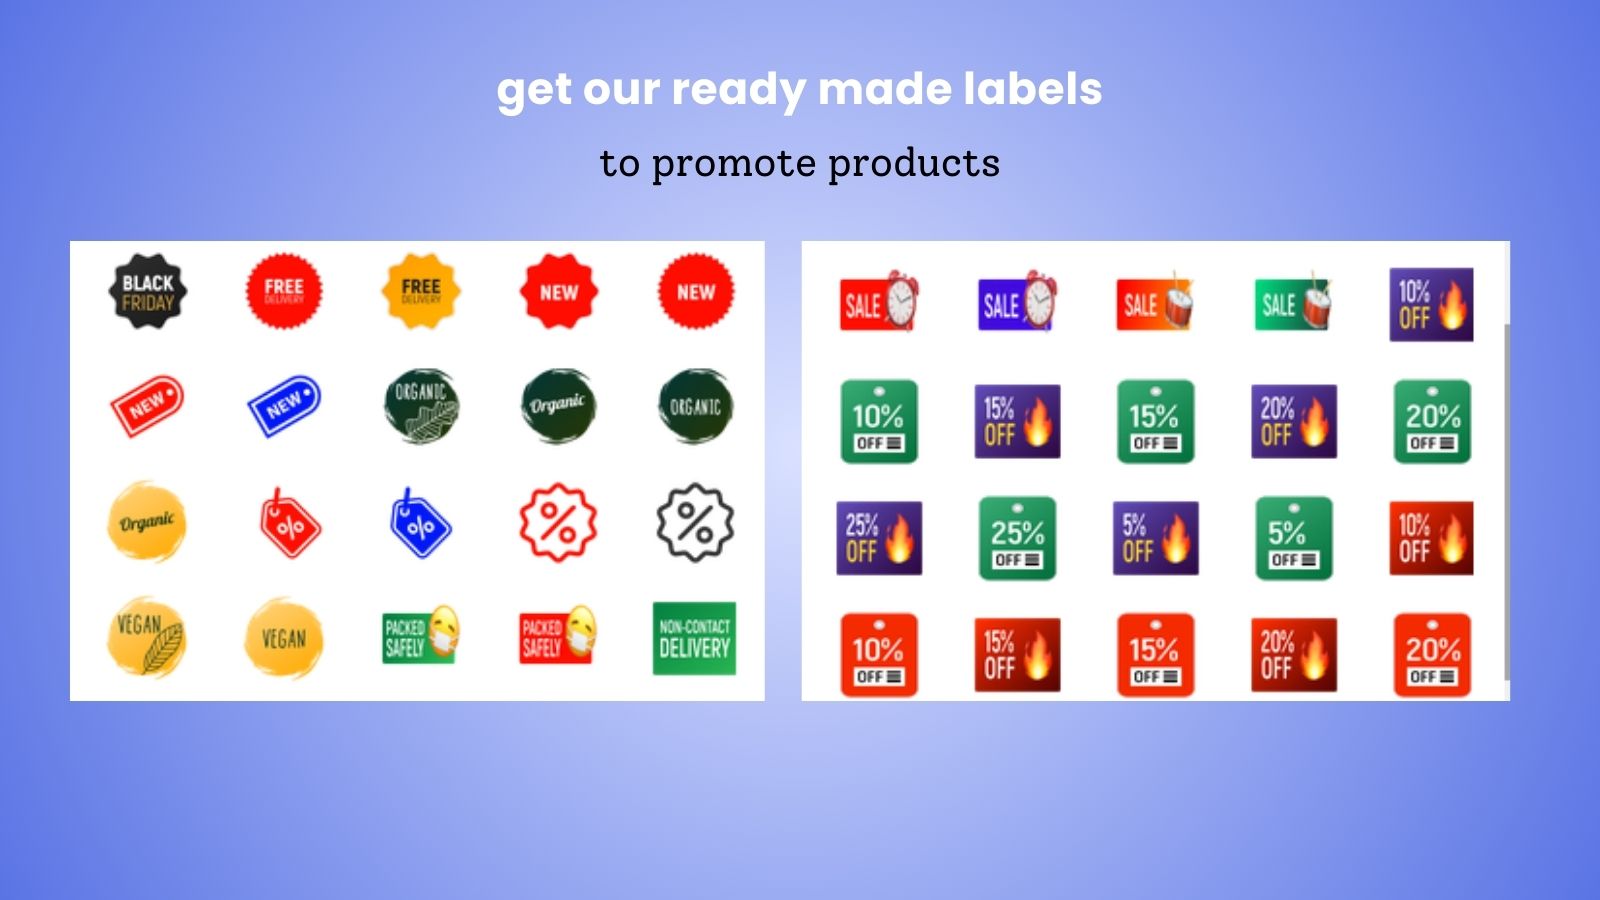 get more than 100 ready-made labels